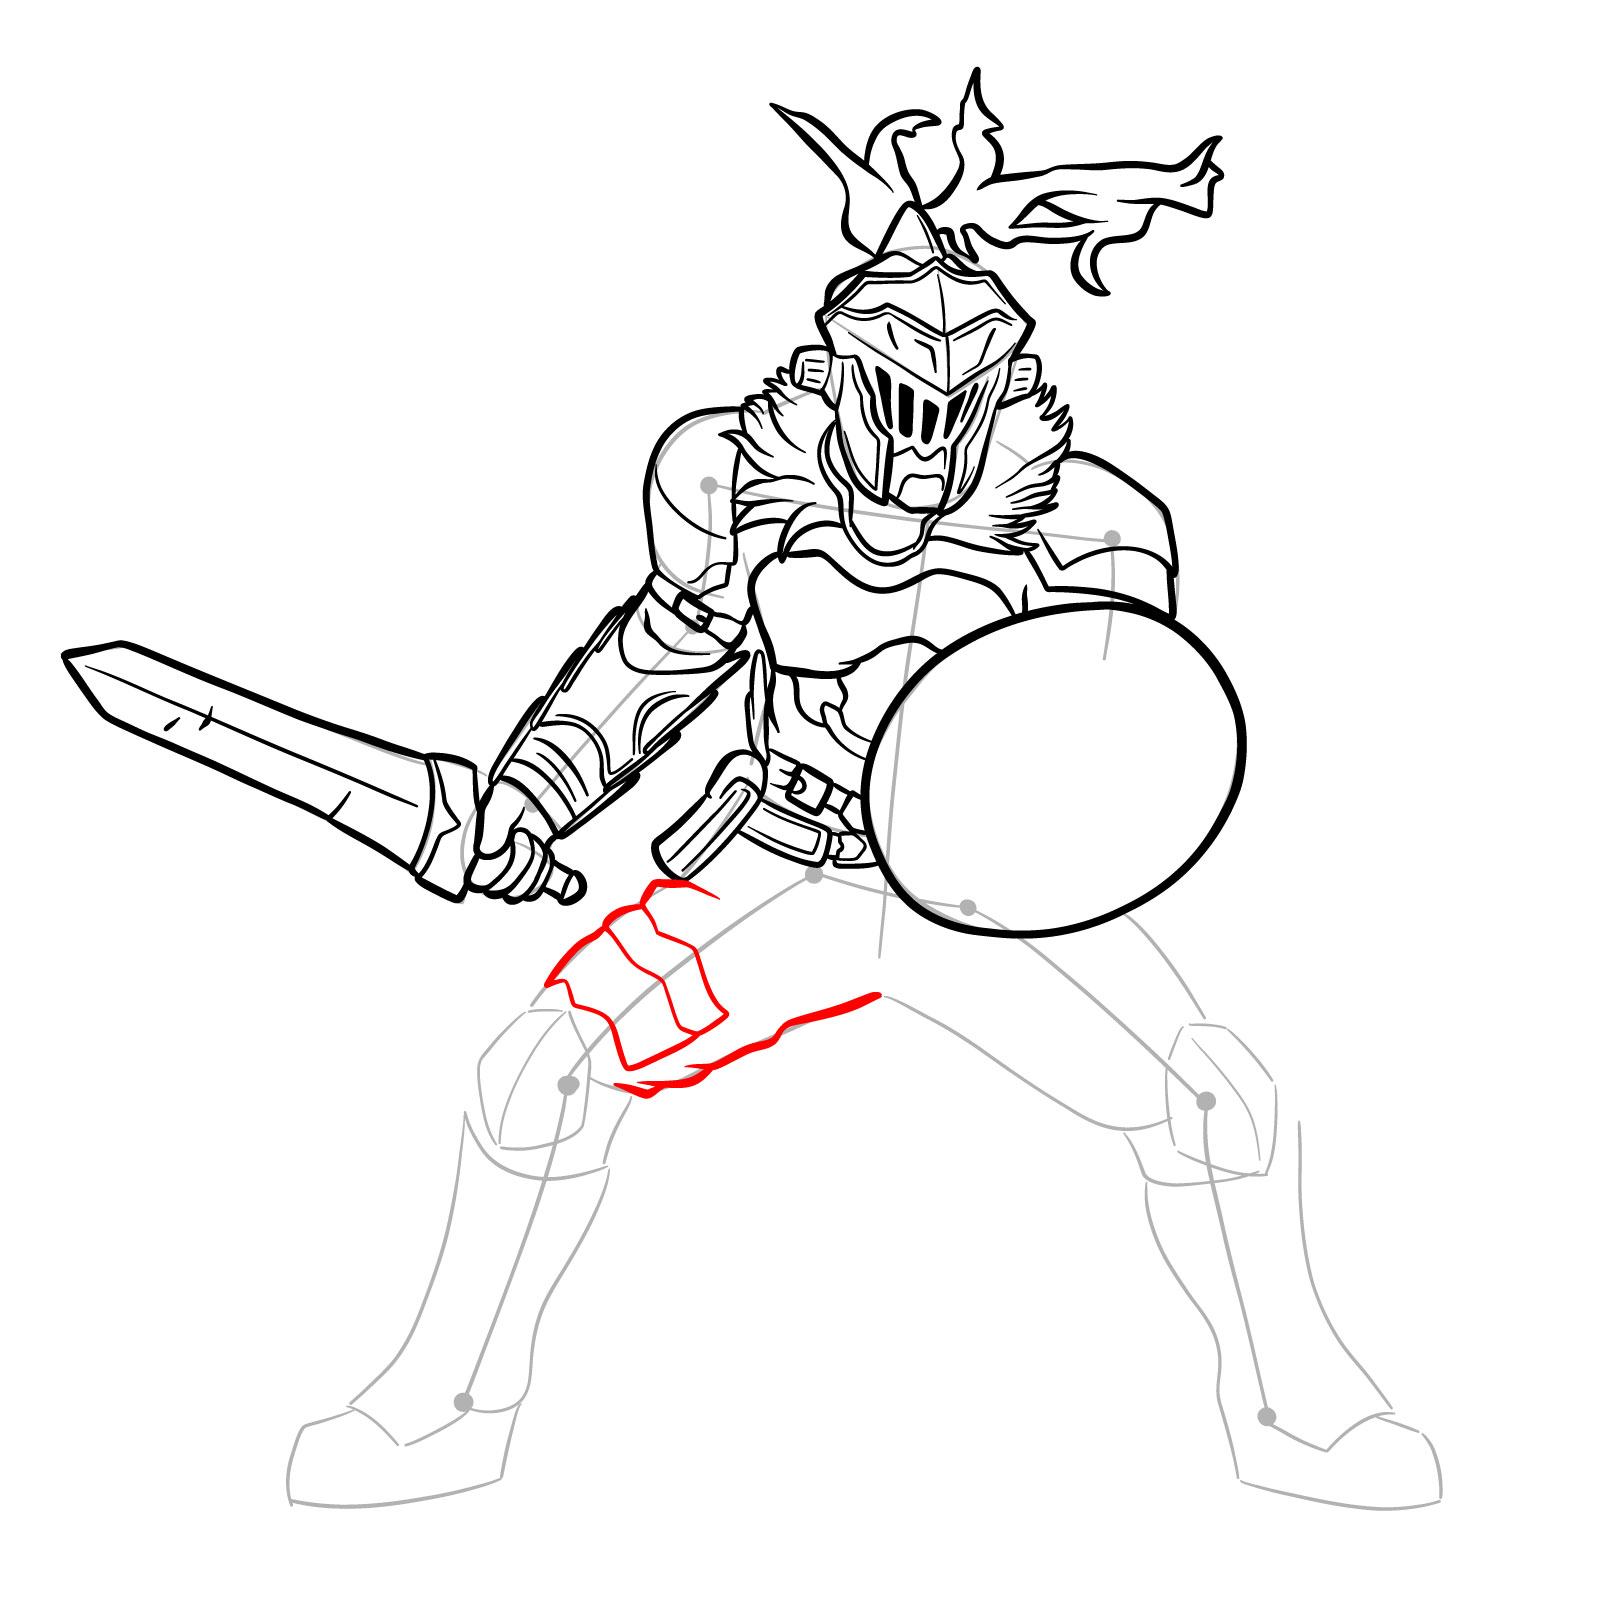 How to Draw Goblin Slayer in battle stance - step 27